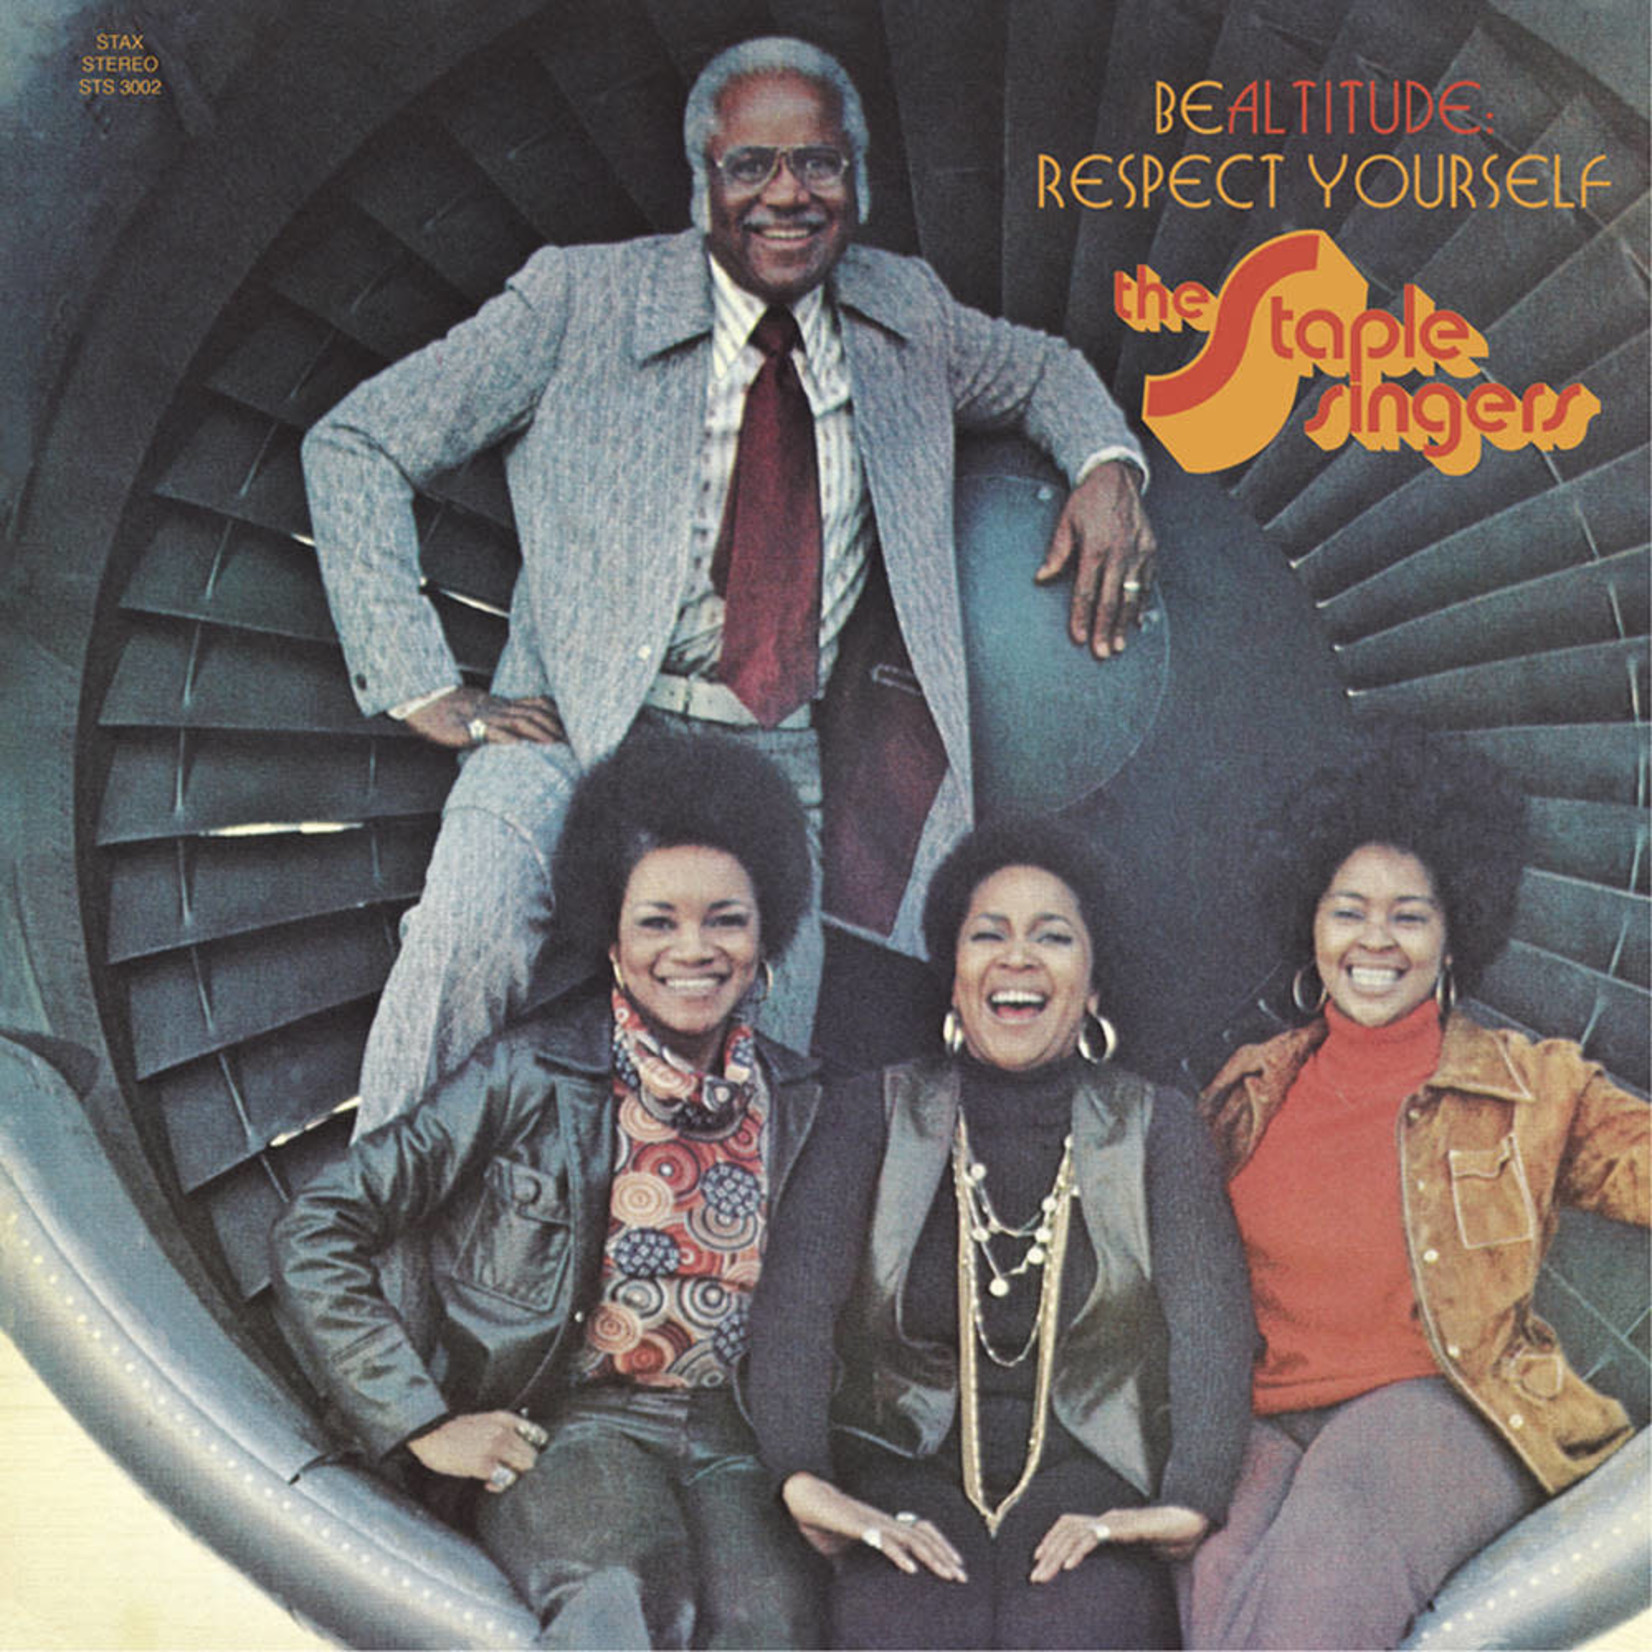 Craft Staple Singers - Be Altitude: Respect Yourself (LP)